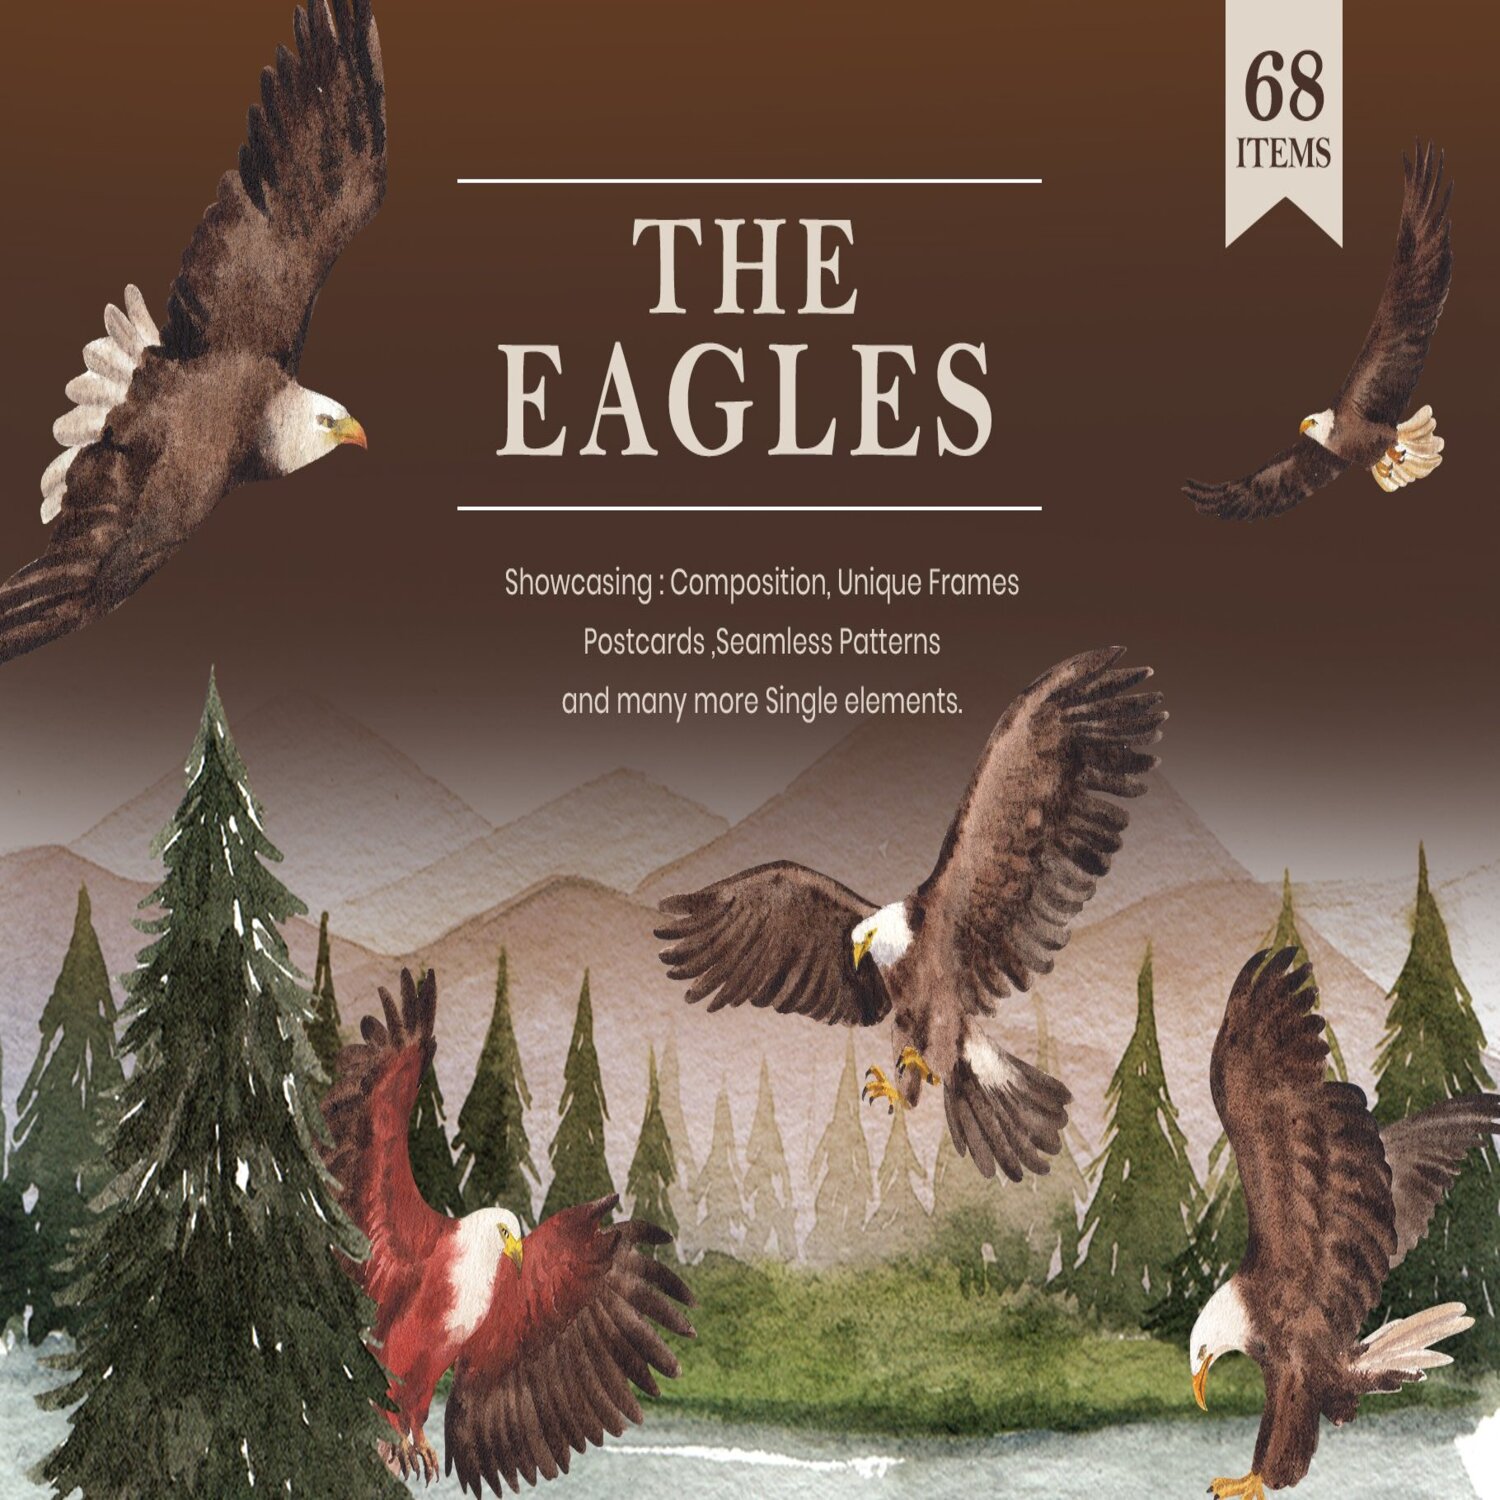 The Eagles Watercolor cover.